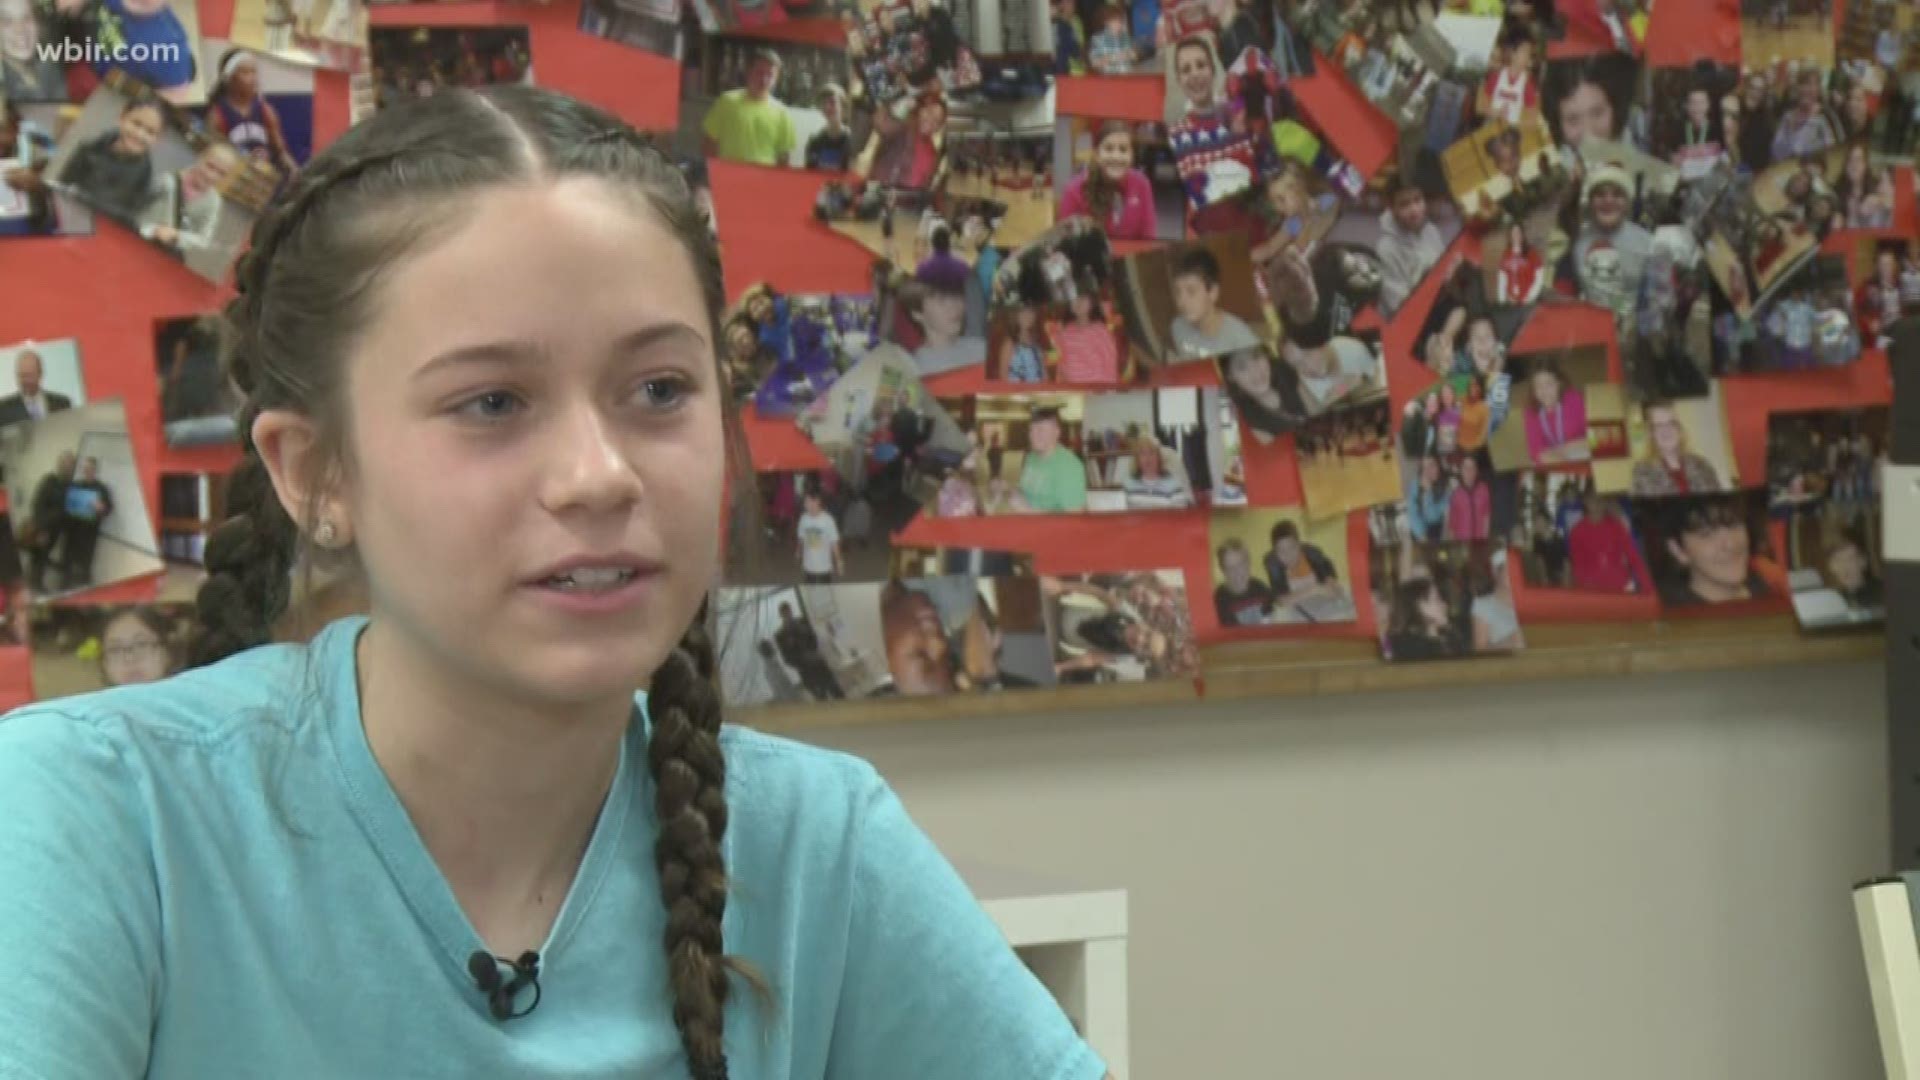 AVA IS ONE OF NEARLY 50 STUDENTS ON THE WAITING LIST FOR BIG BROTHERS BIG SISTERS OF EAST TENNESSEE'S MENTOR 2.0 PROGRAM WHERE BIGS AND THEIR LITTLES MEET AT SCHOOL EACH WEEK.